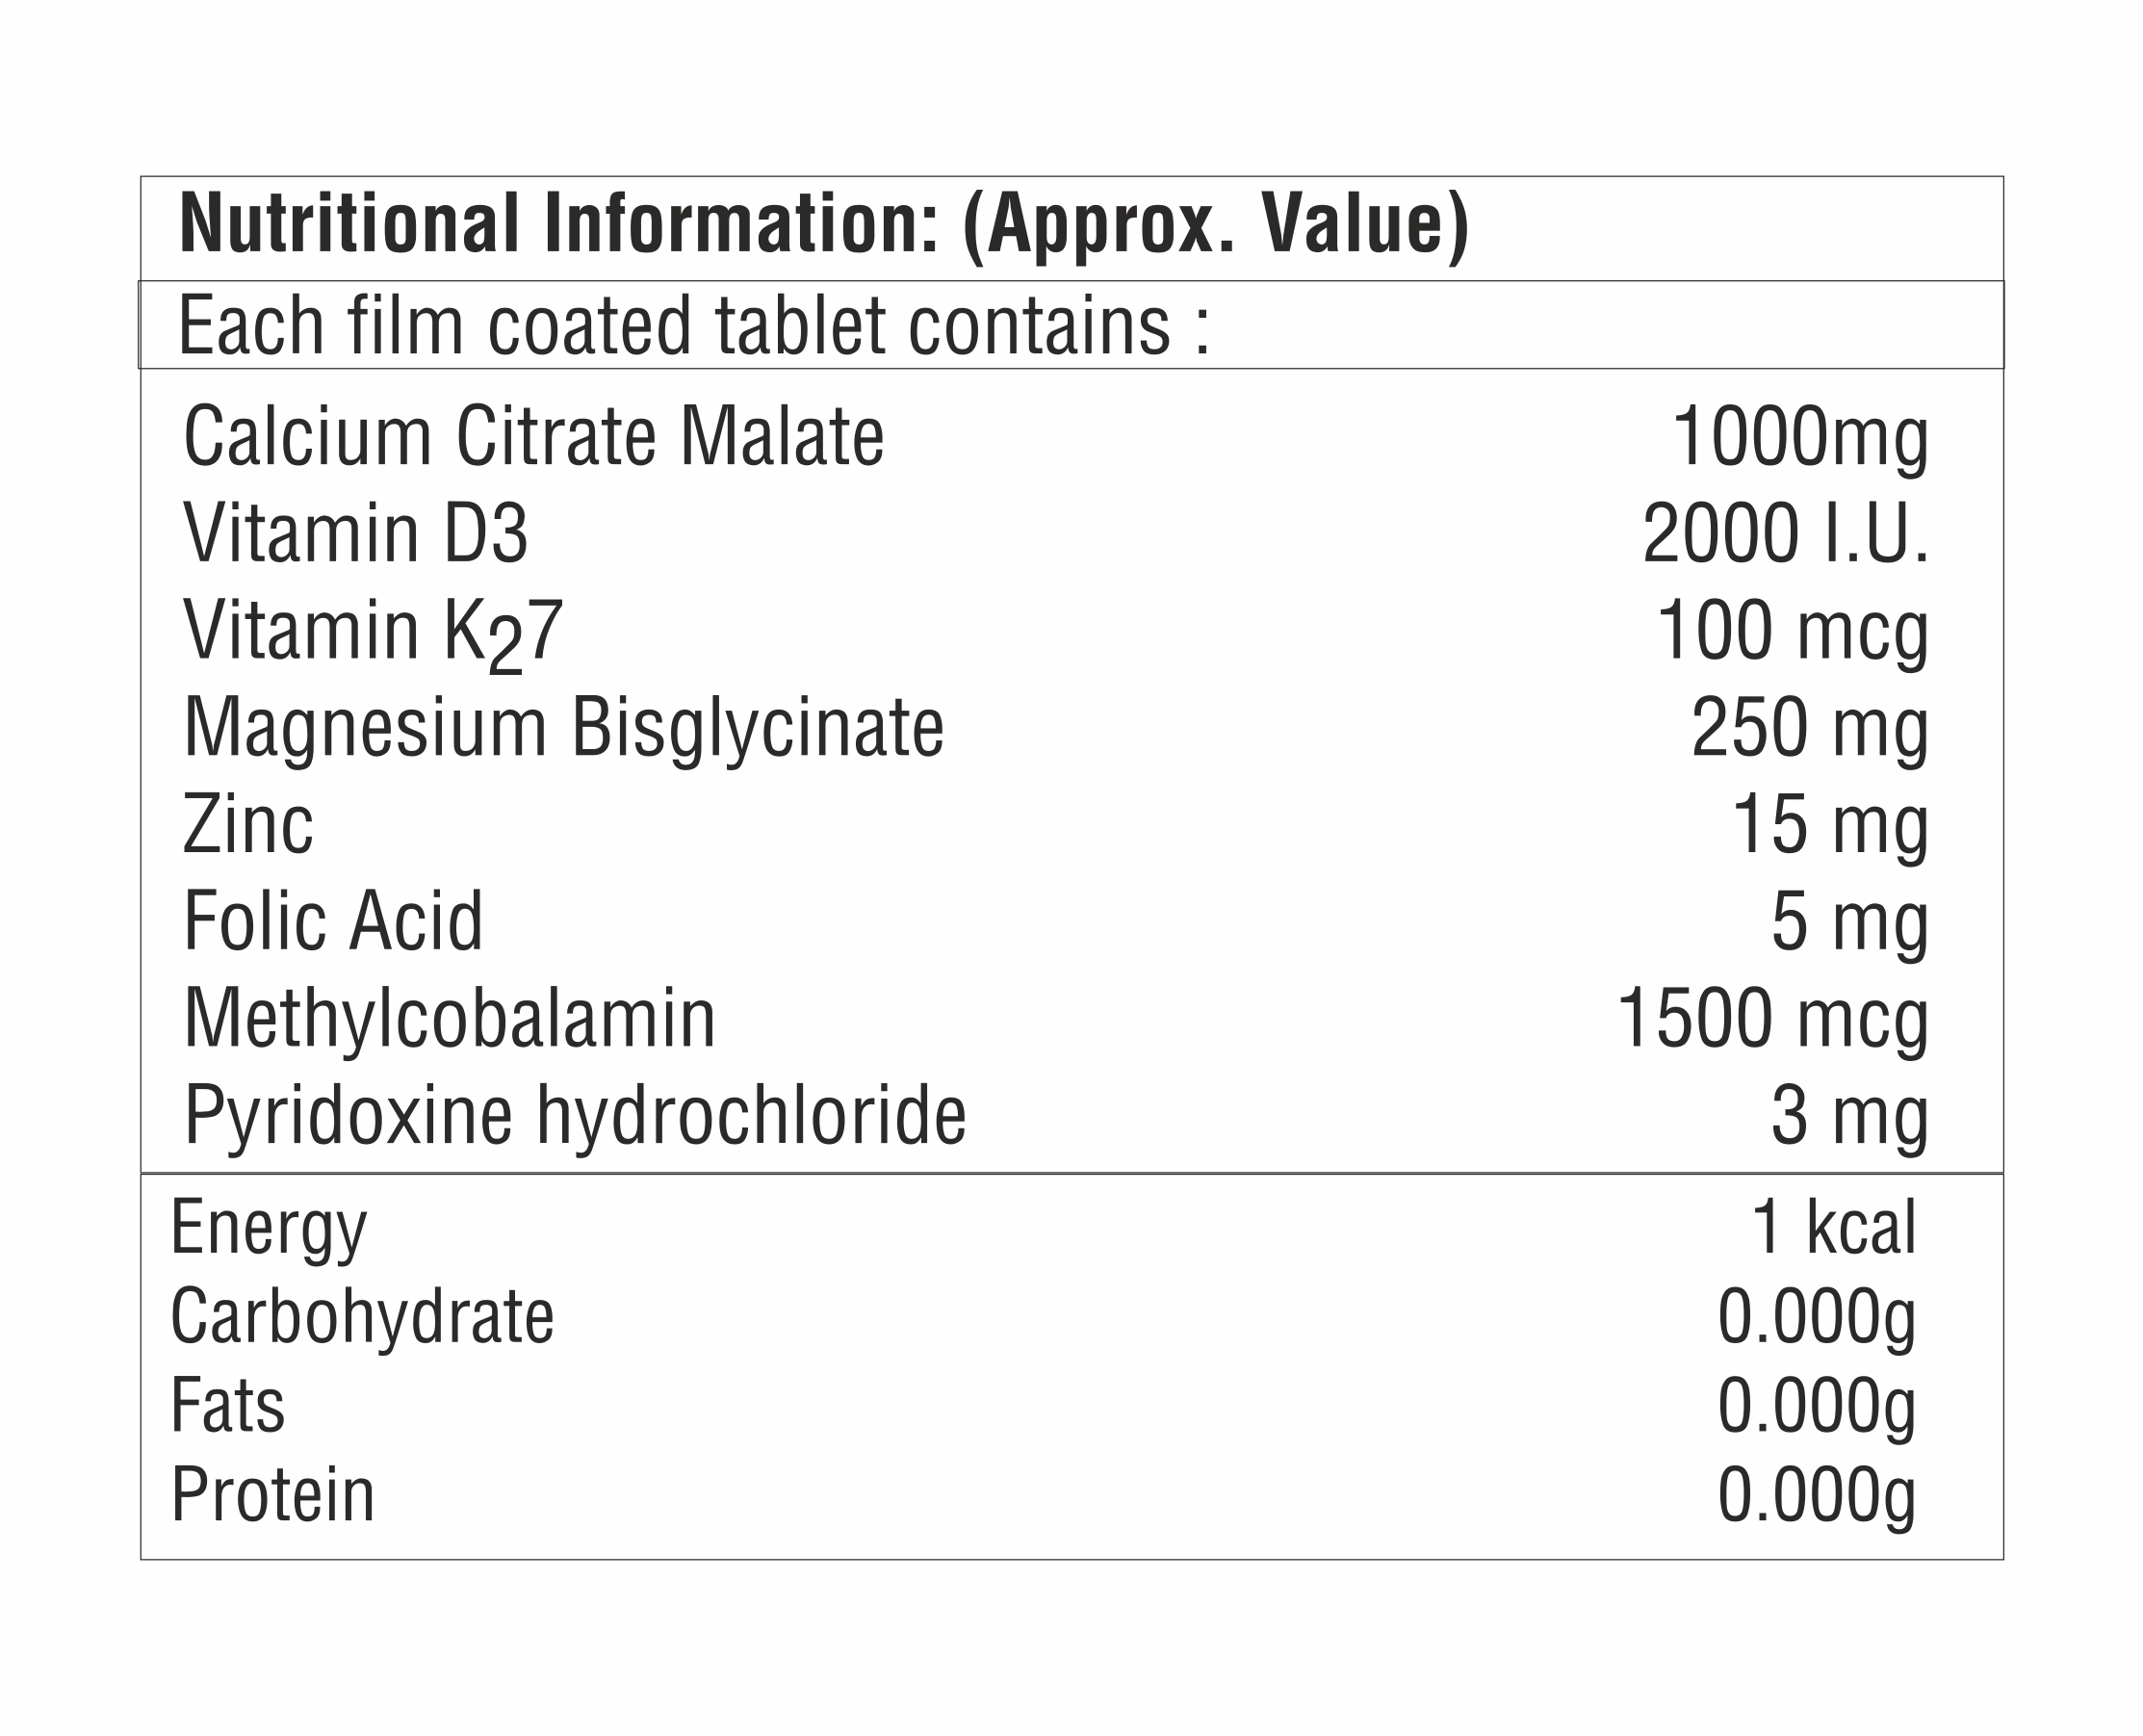 CCM With Vitamin D3 With Vitamin K27 And Folic Acid Tablet.